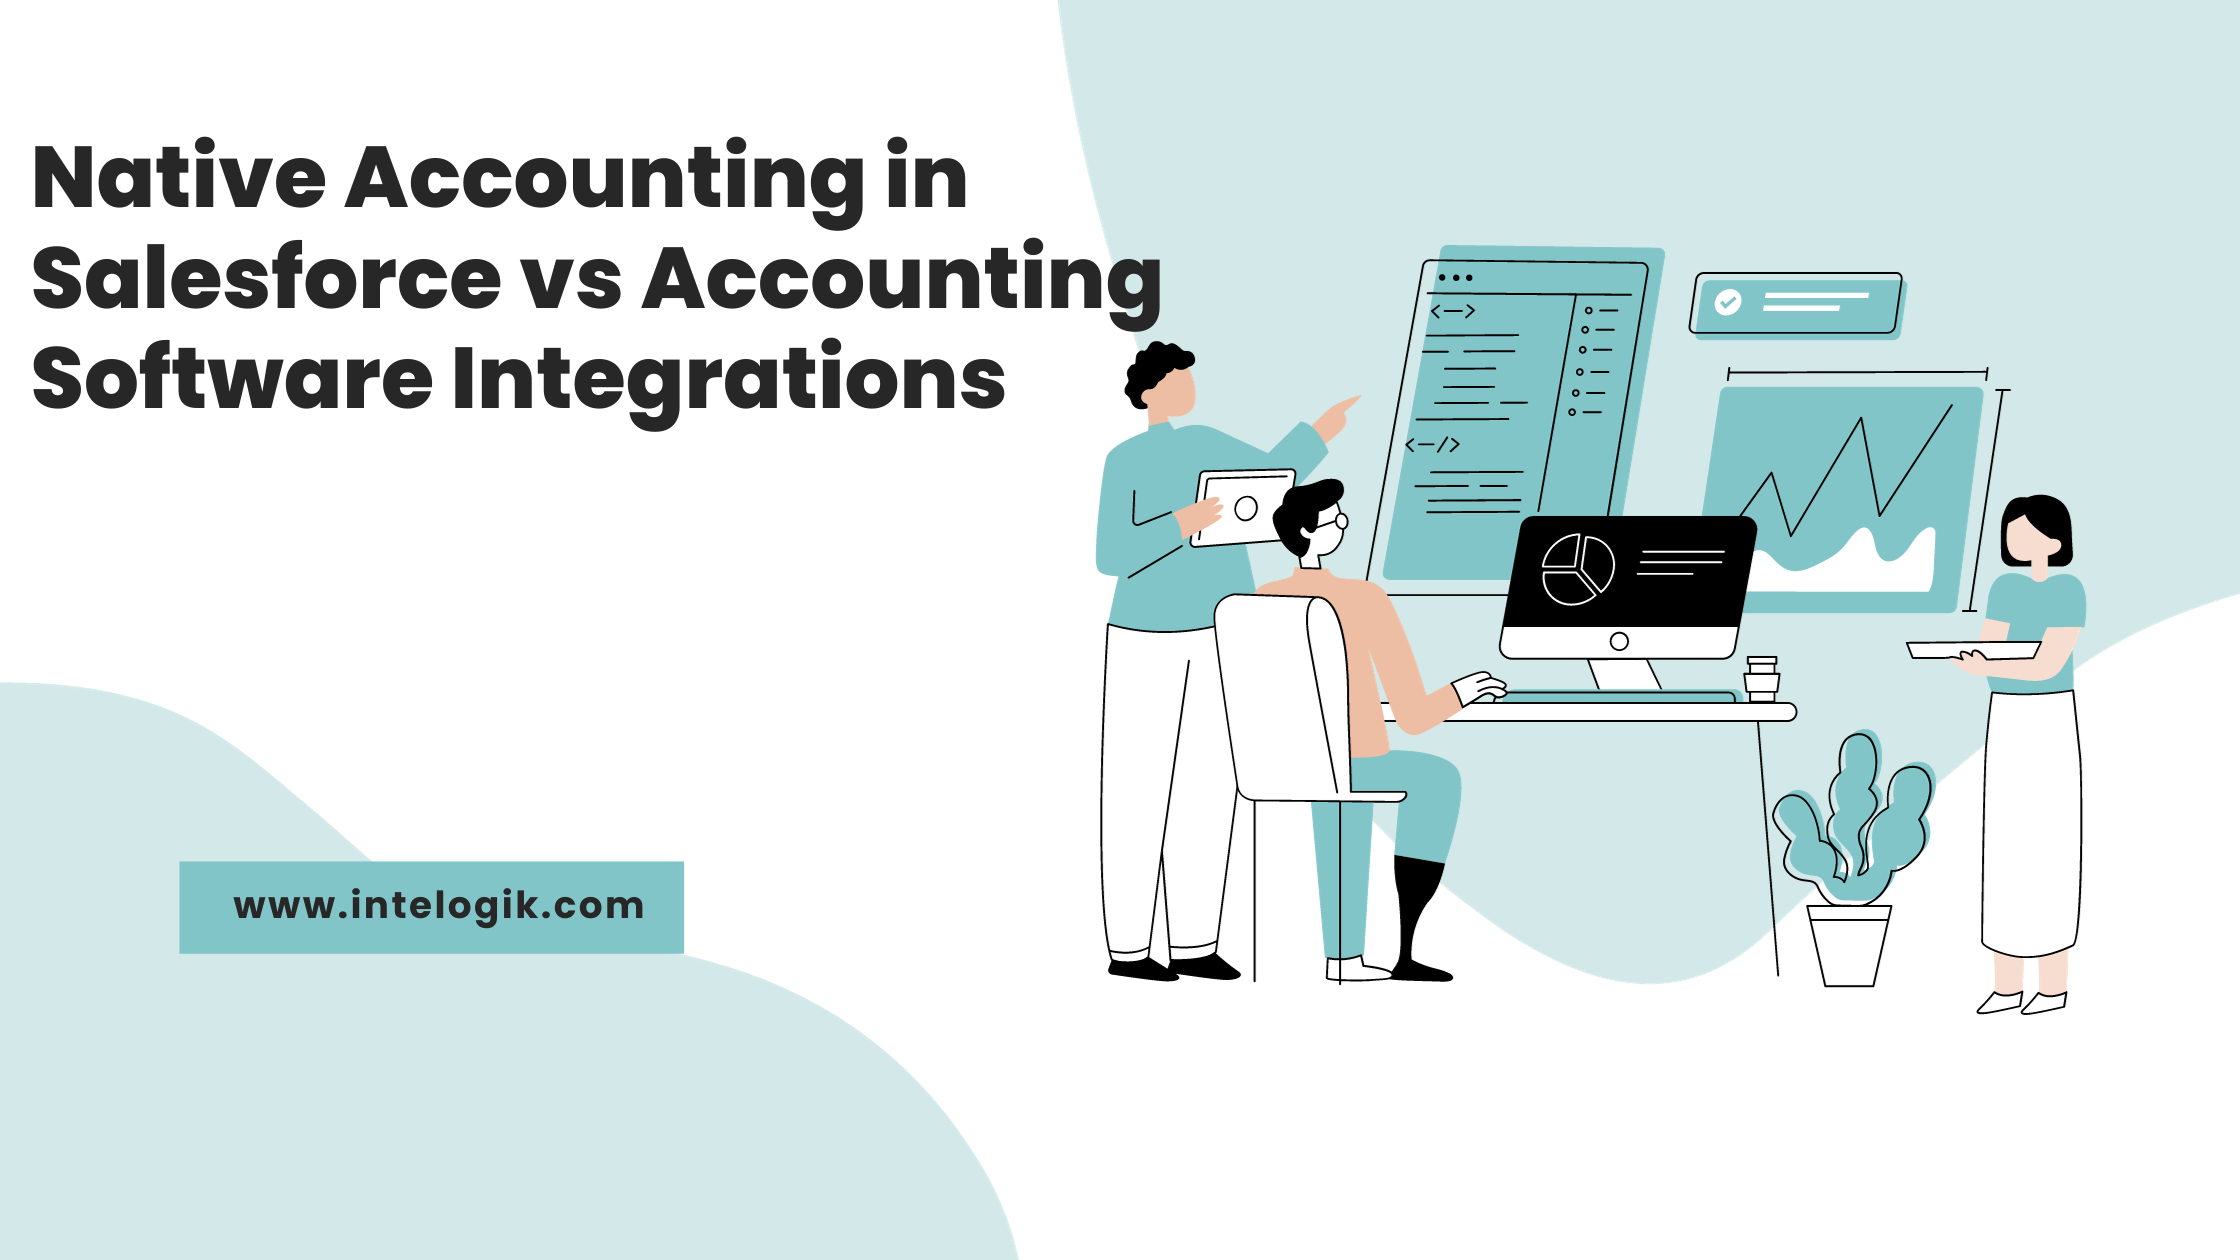 Comparing Native Accounting Capabilities in Salesforce with Accounting Software Integrations